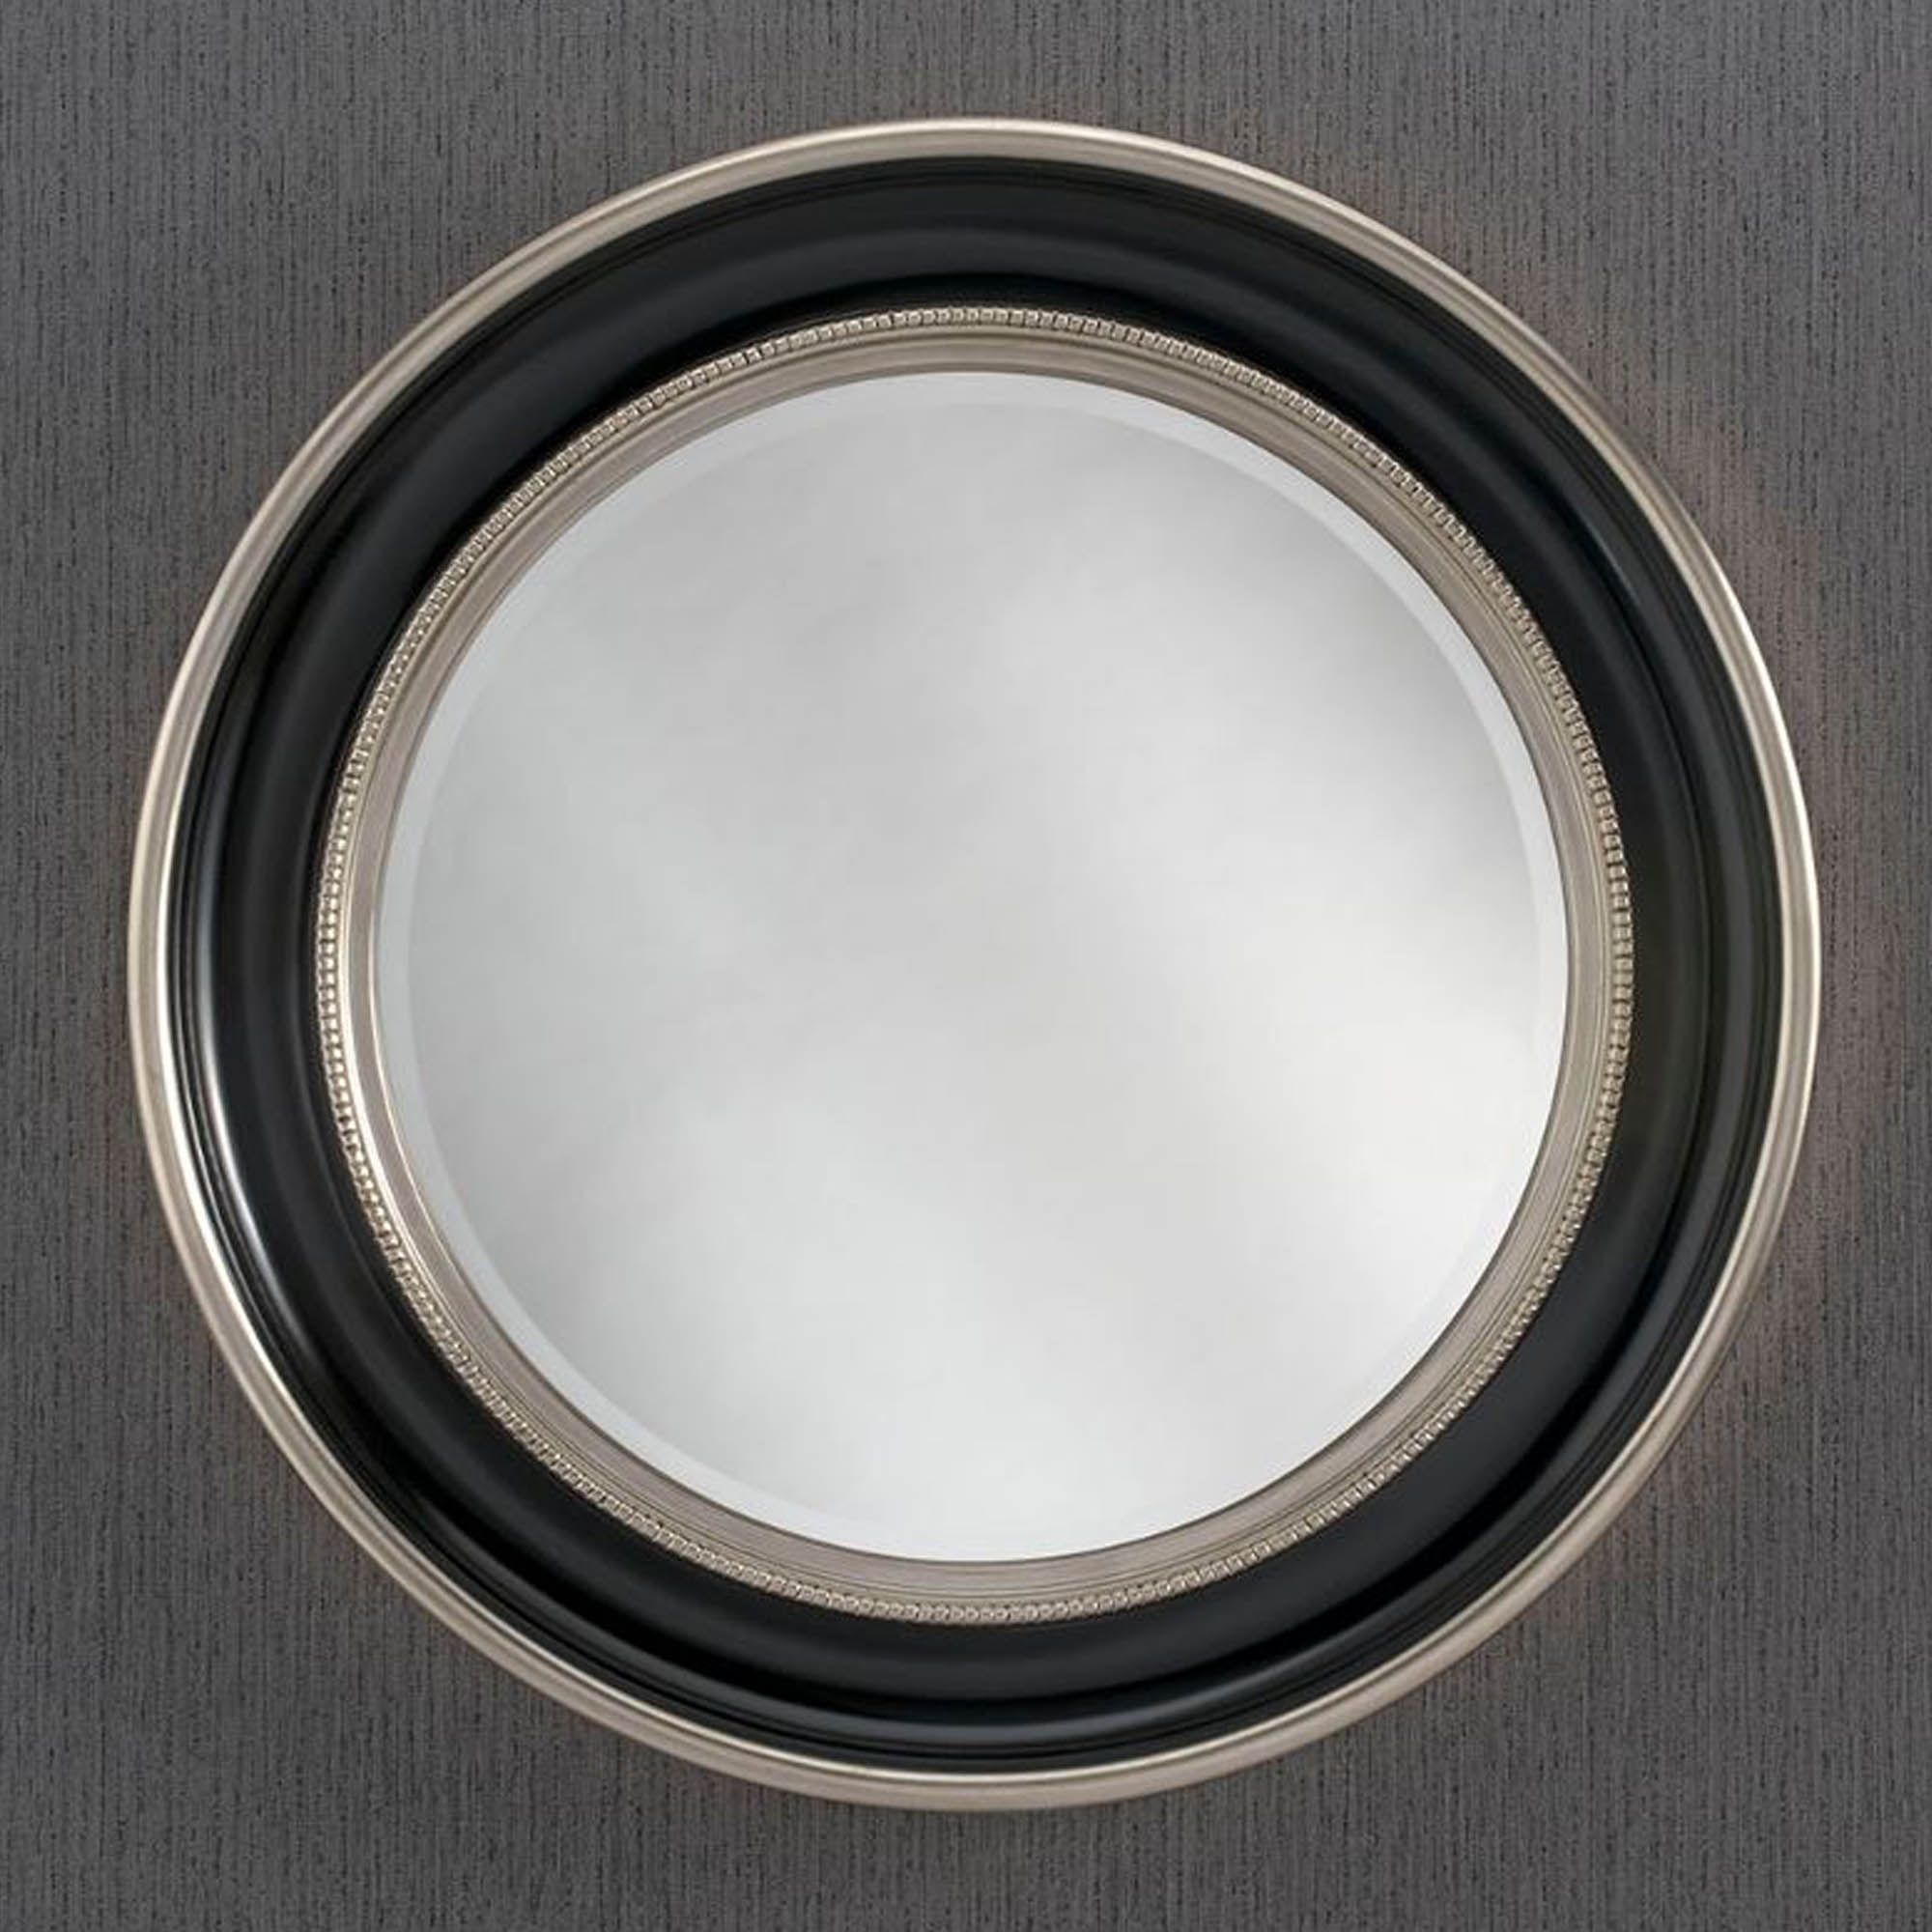 Round Black & Silver Contemporary Wall Mirror | Homesdirect365 With Regard To Midnight Black Round Wall Mirrors (View 1 of 15)